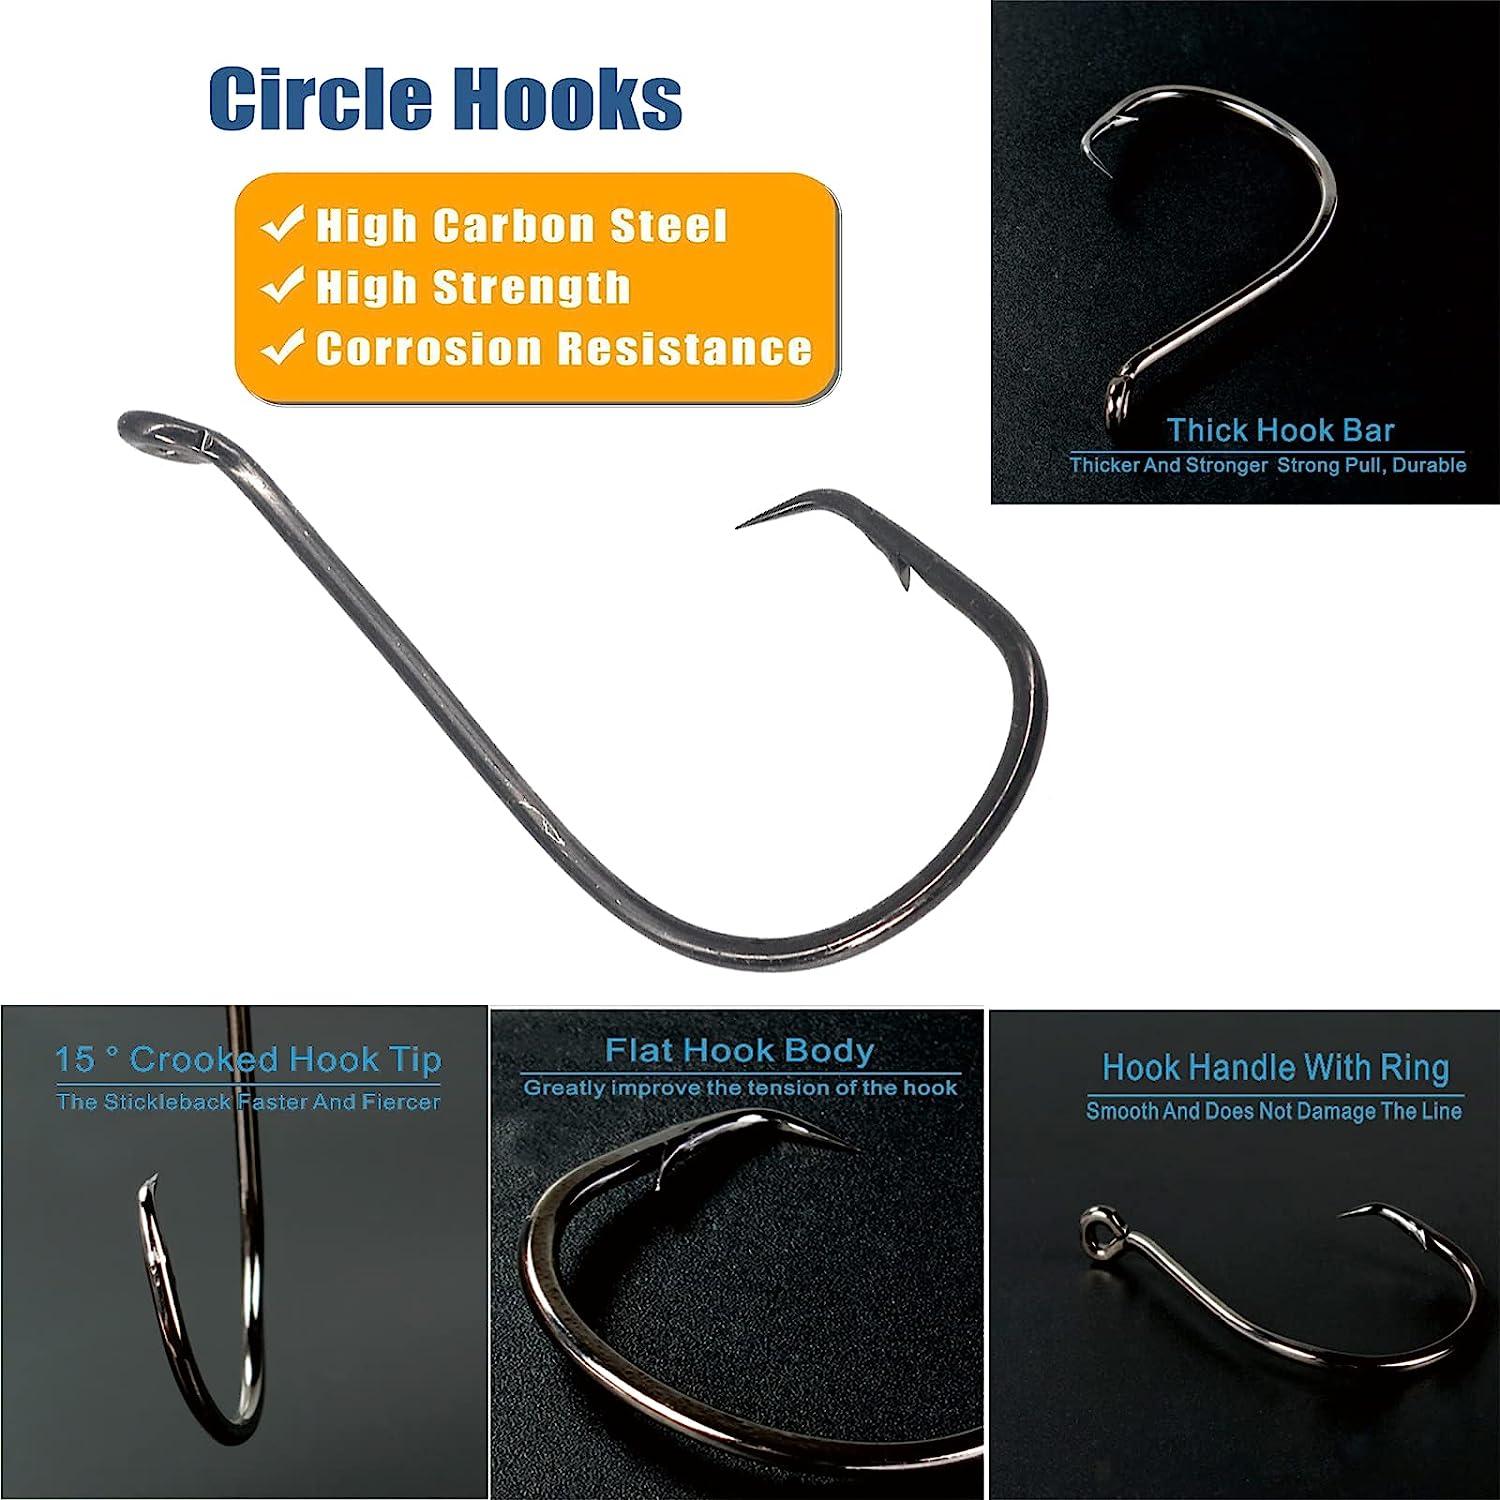 Octopus Hooks – The Hook Up Tackle